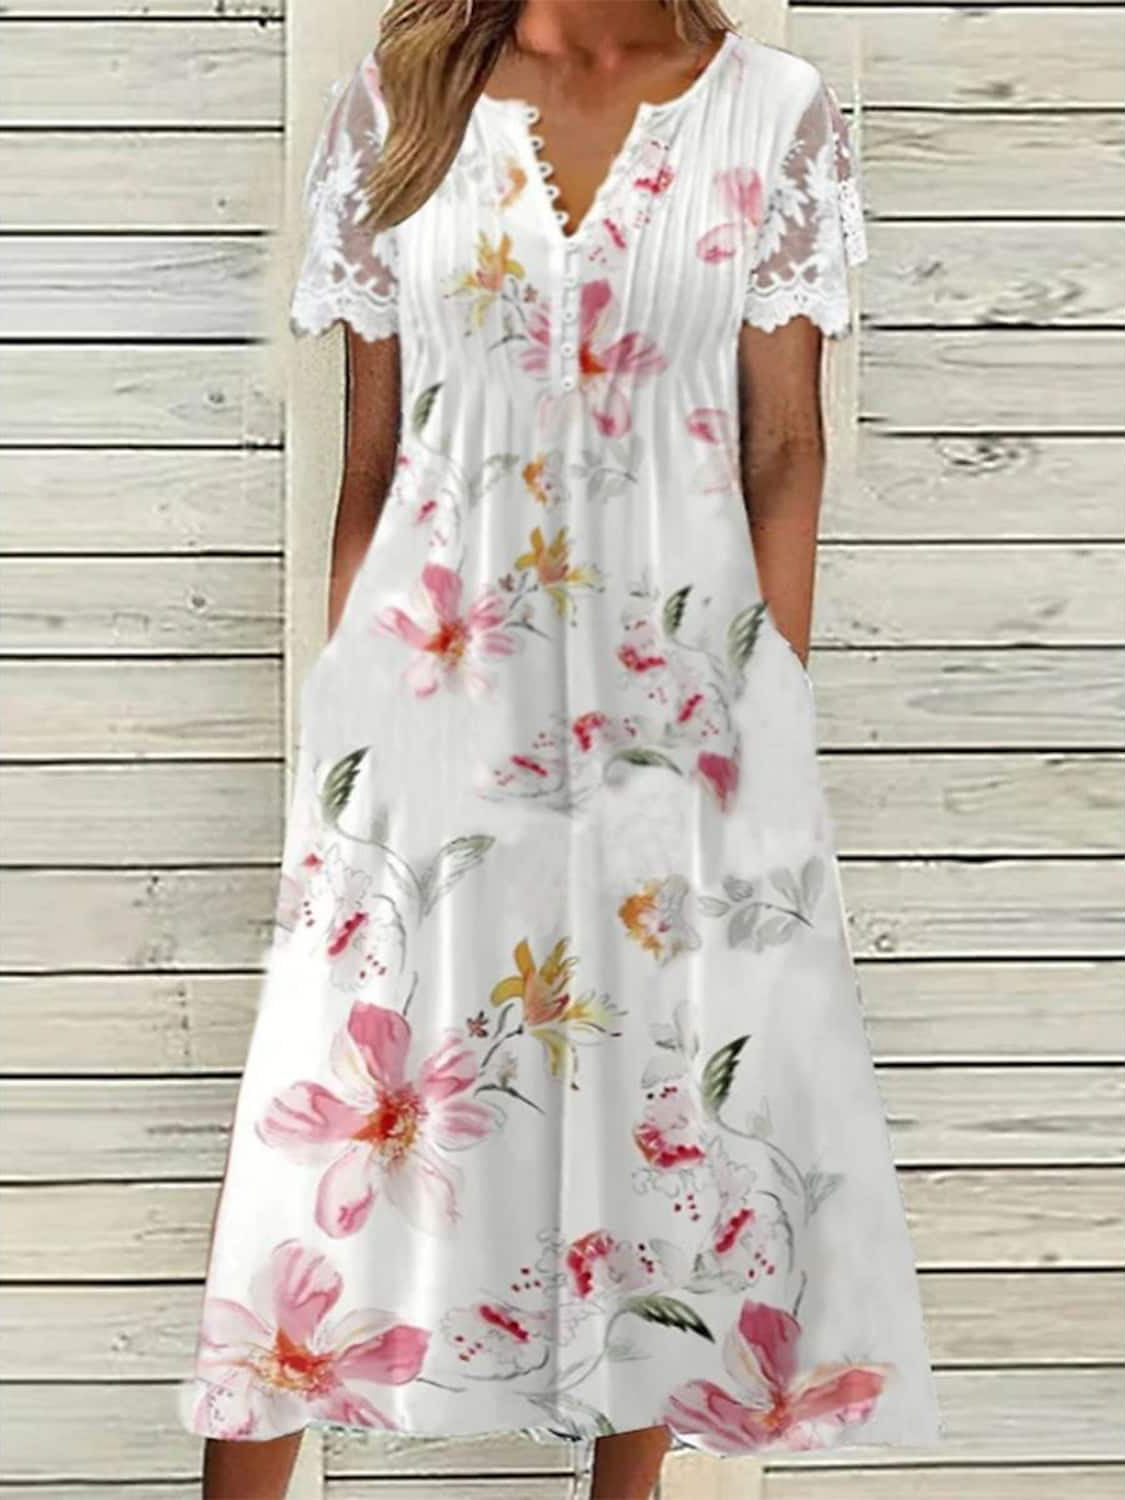 Women's Floral Printed Lace Short Sleeve V-neck Maxi Dress